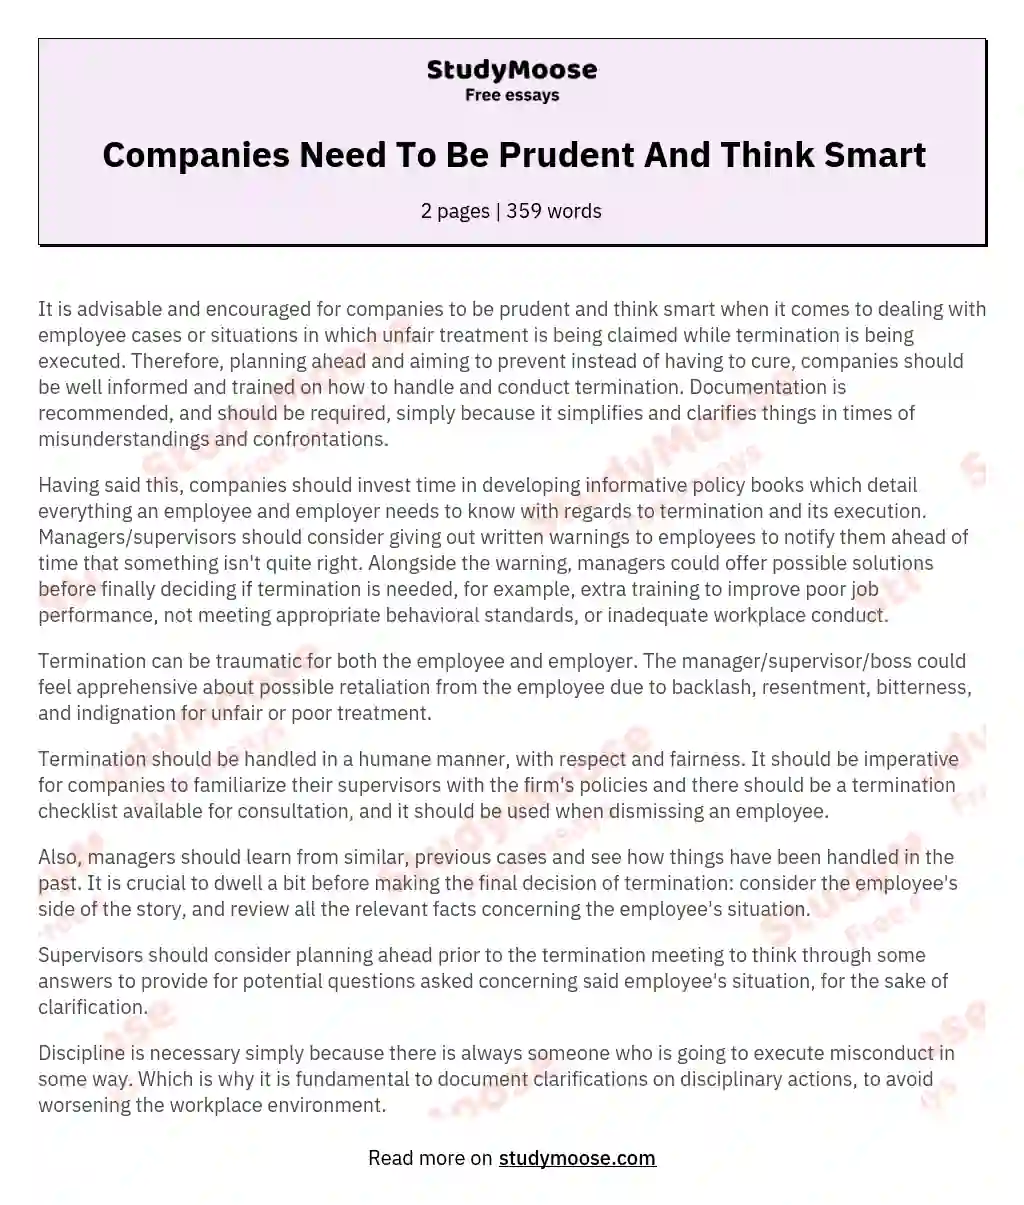 Companies Need To Be Prudent And Think Smart essay